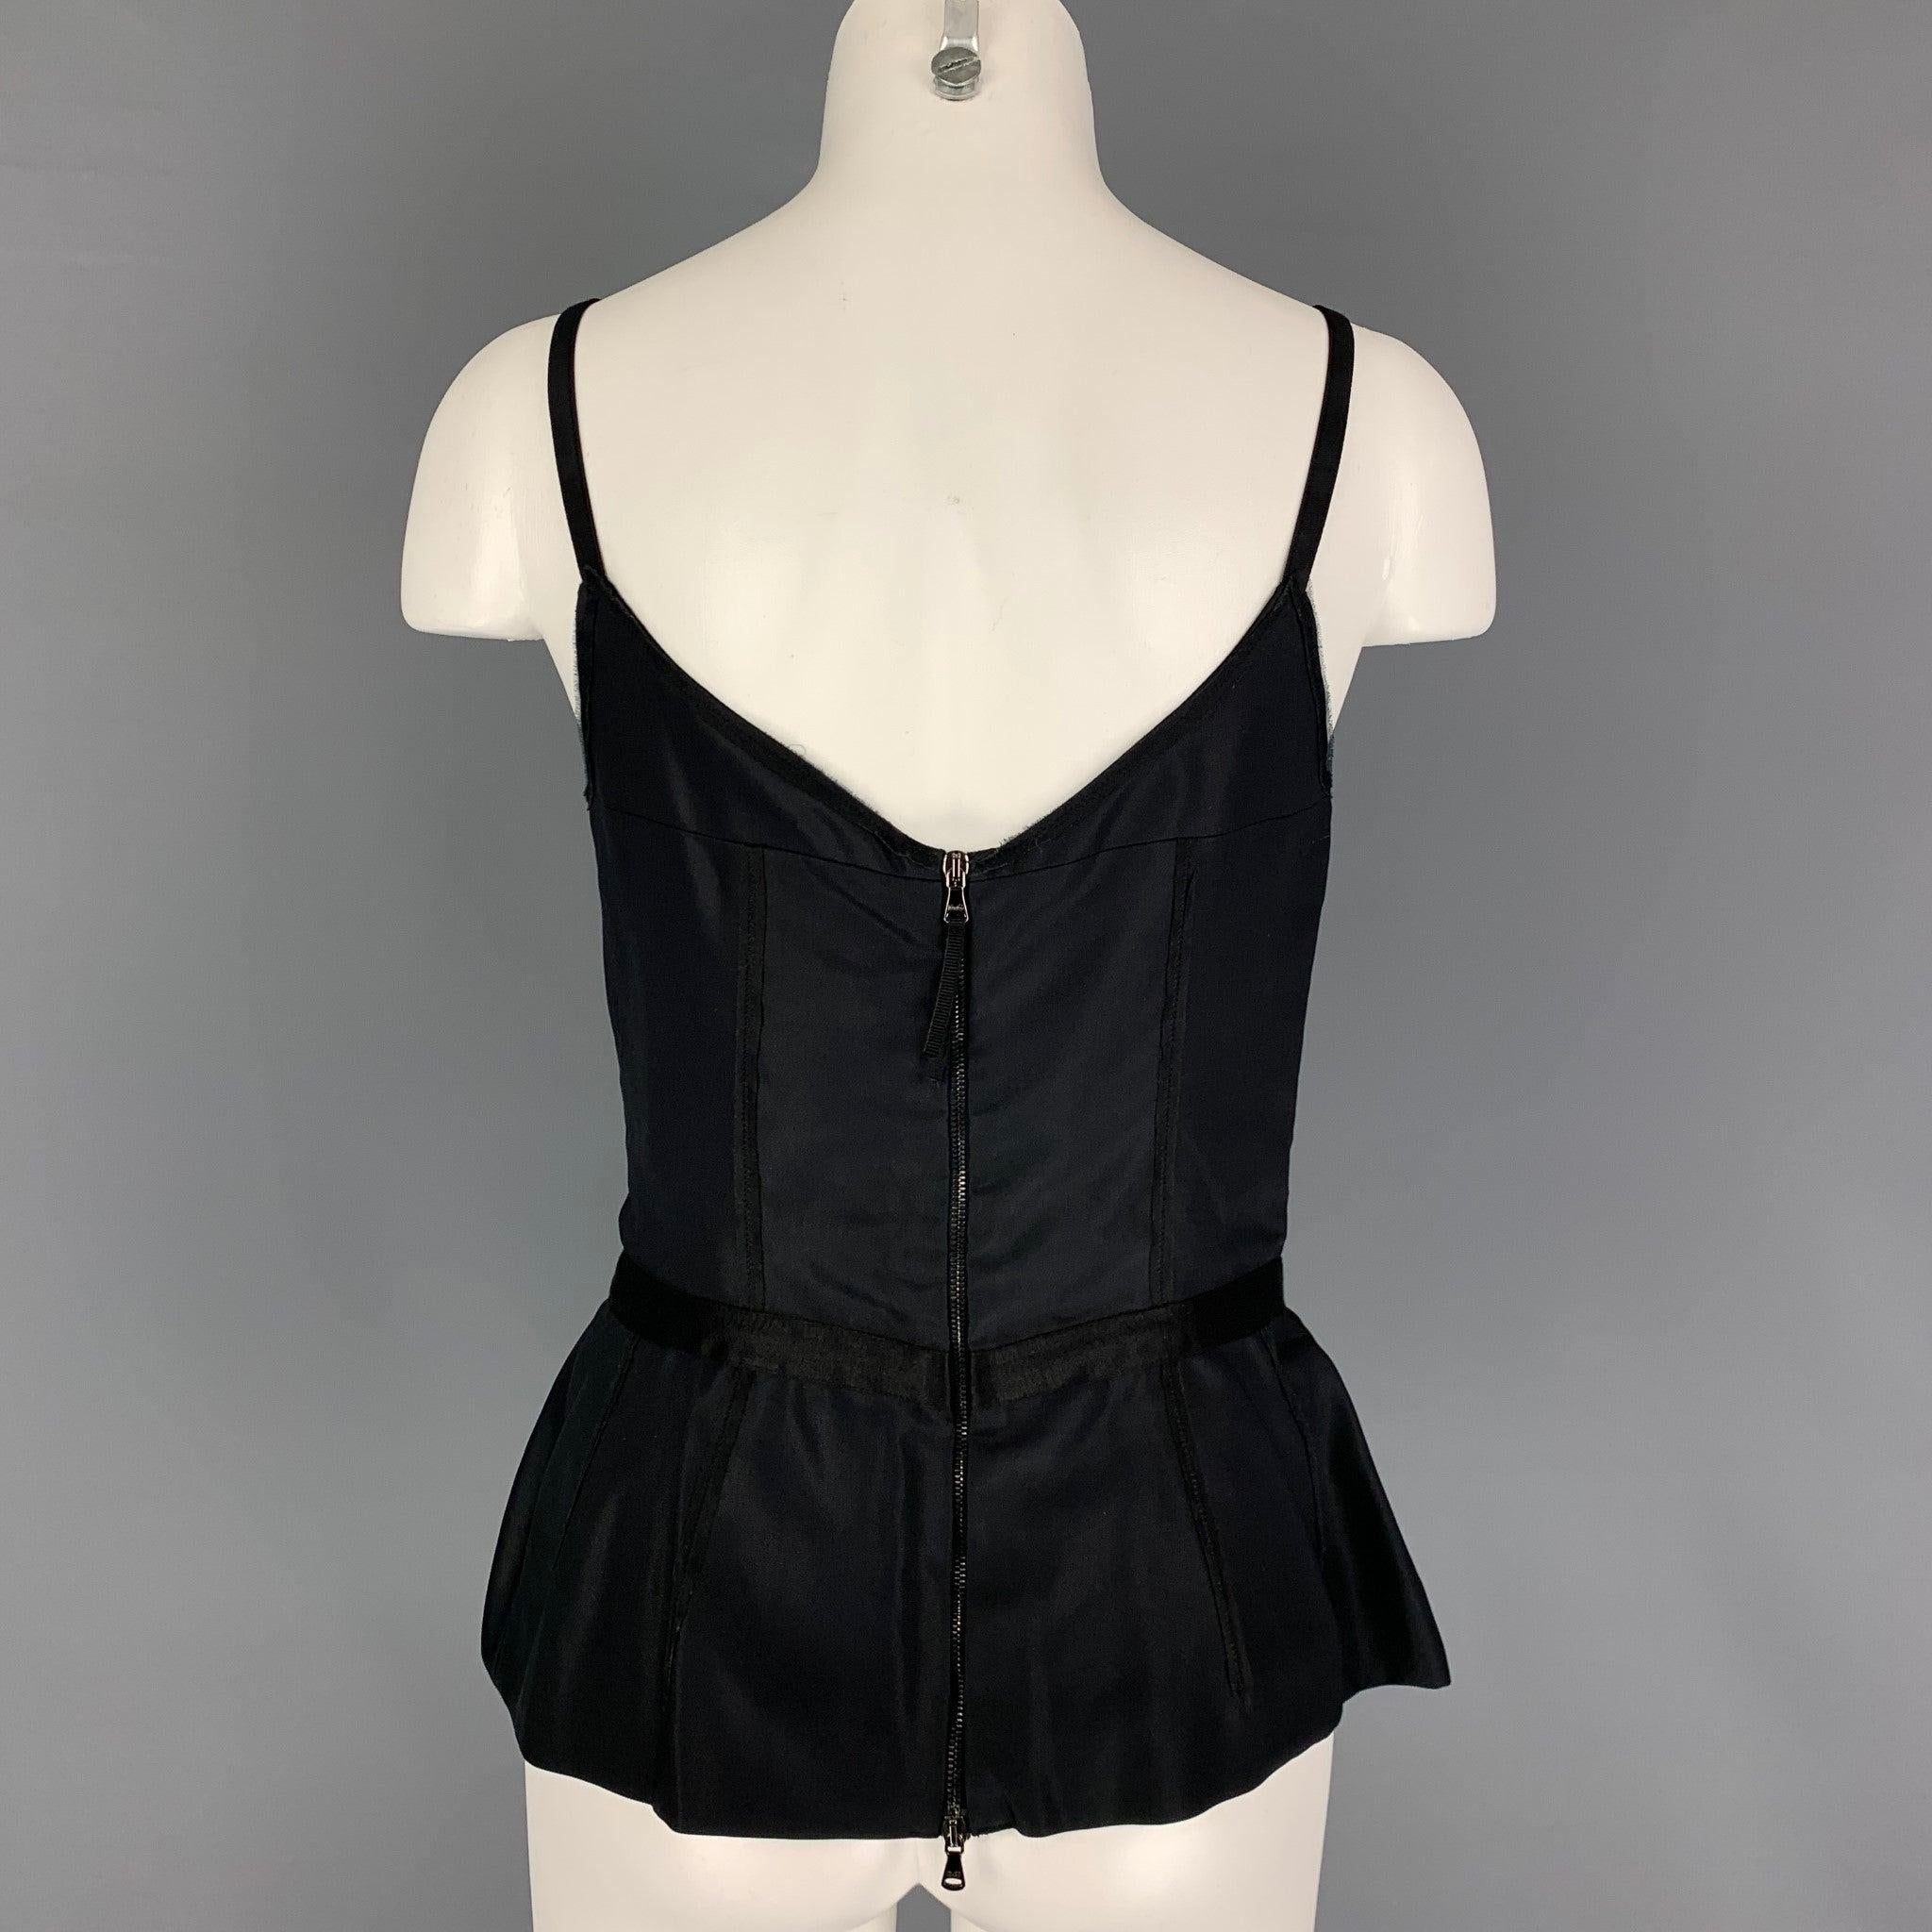 D&G by DOLCE & GABBANA Size 8 Black White Polyamide Bend Lace Bustier Dress Top In Good Condition For Sale In San Francisco, CA